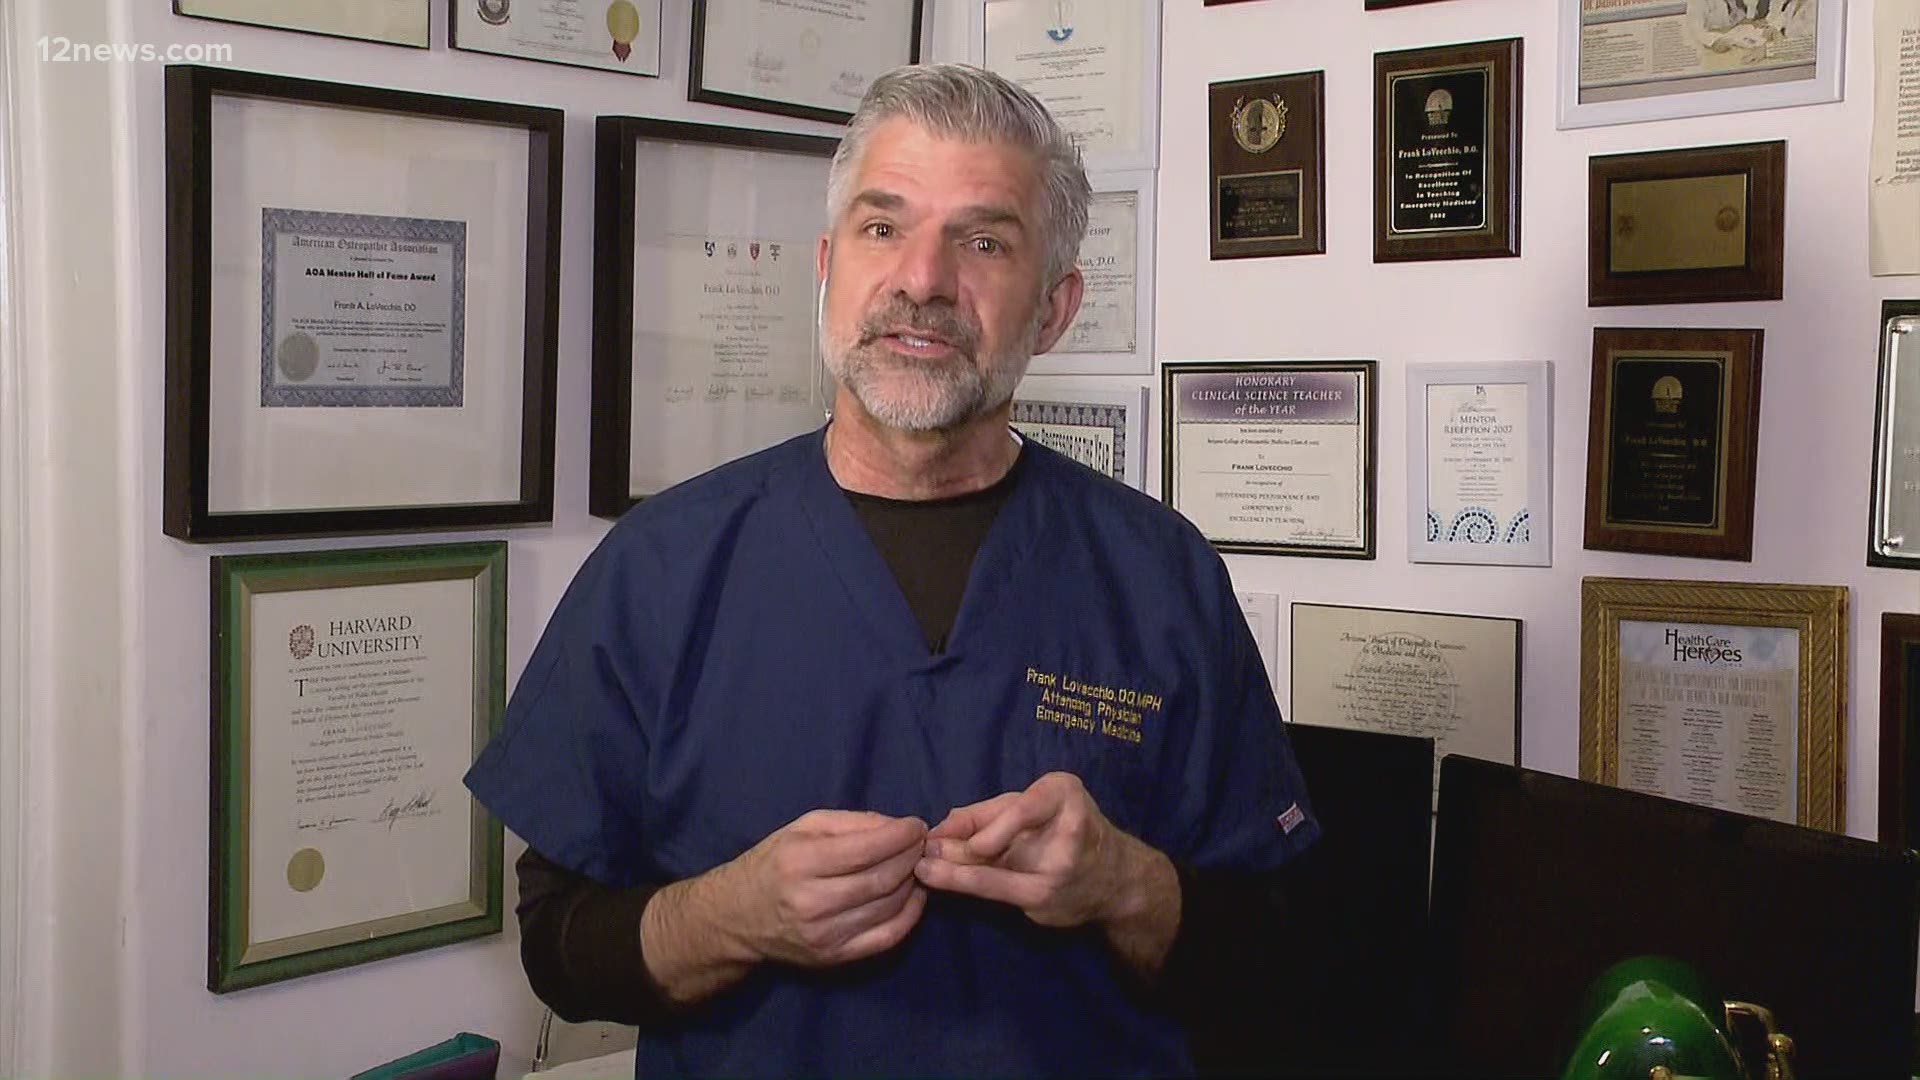 Dr. Frank LoVecchio with Valleywise Health Medical Center is answering your questions about COVID-19. You can find all the past segments at 12News.com/YouTube.